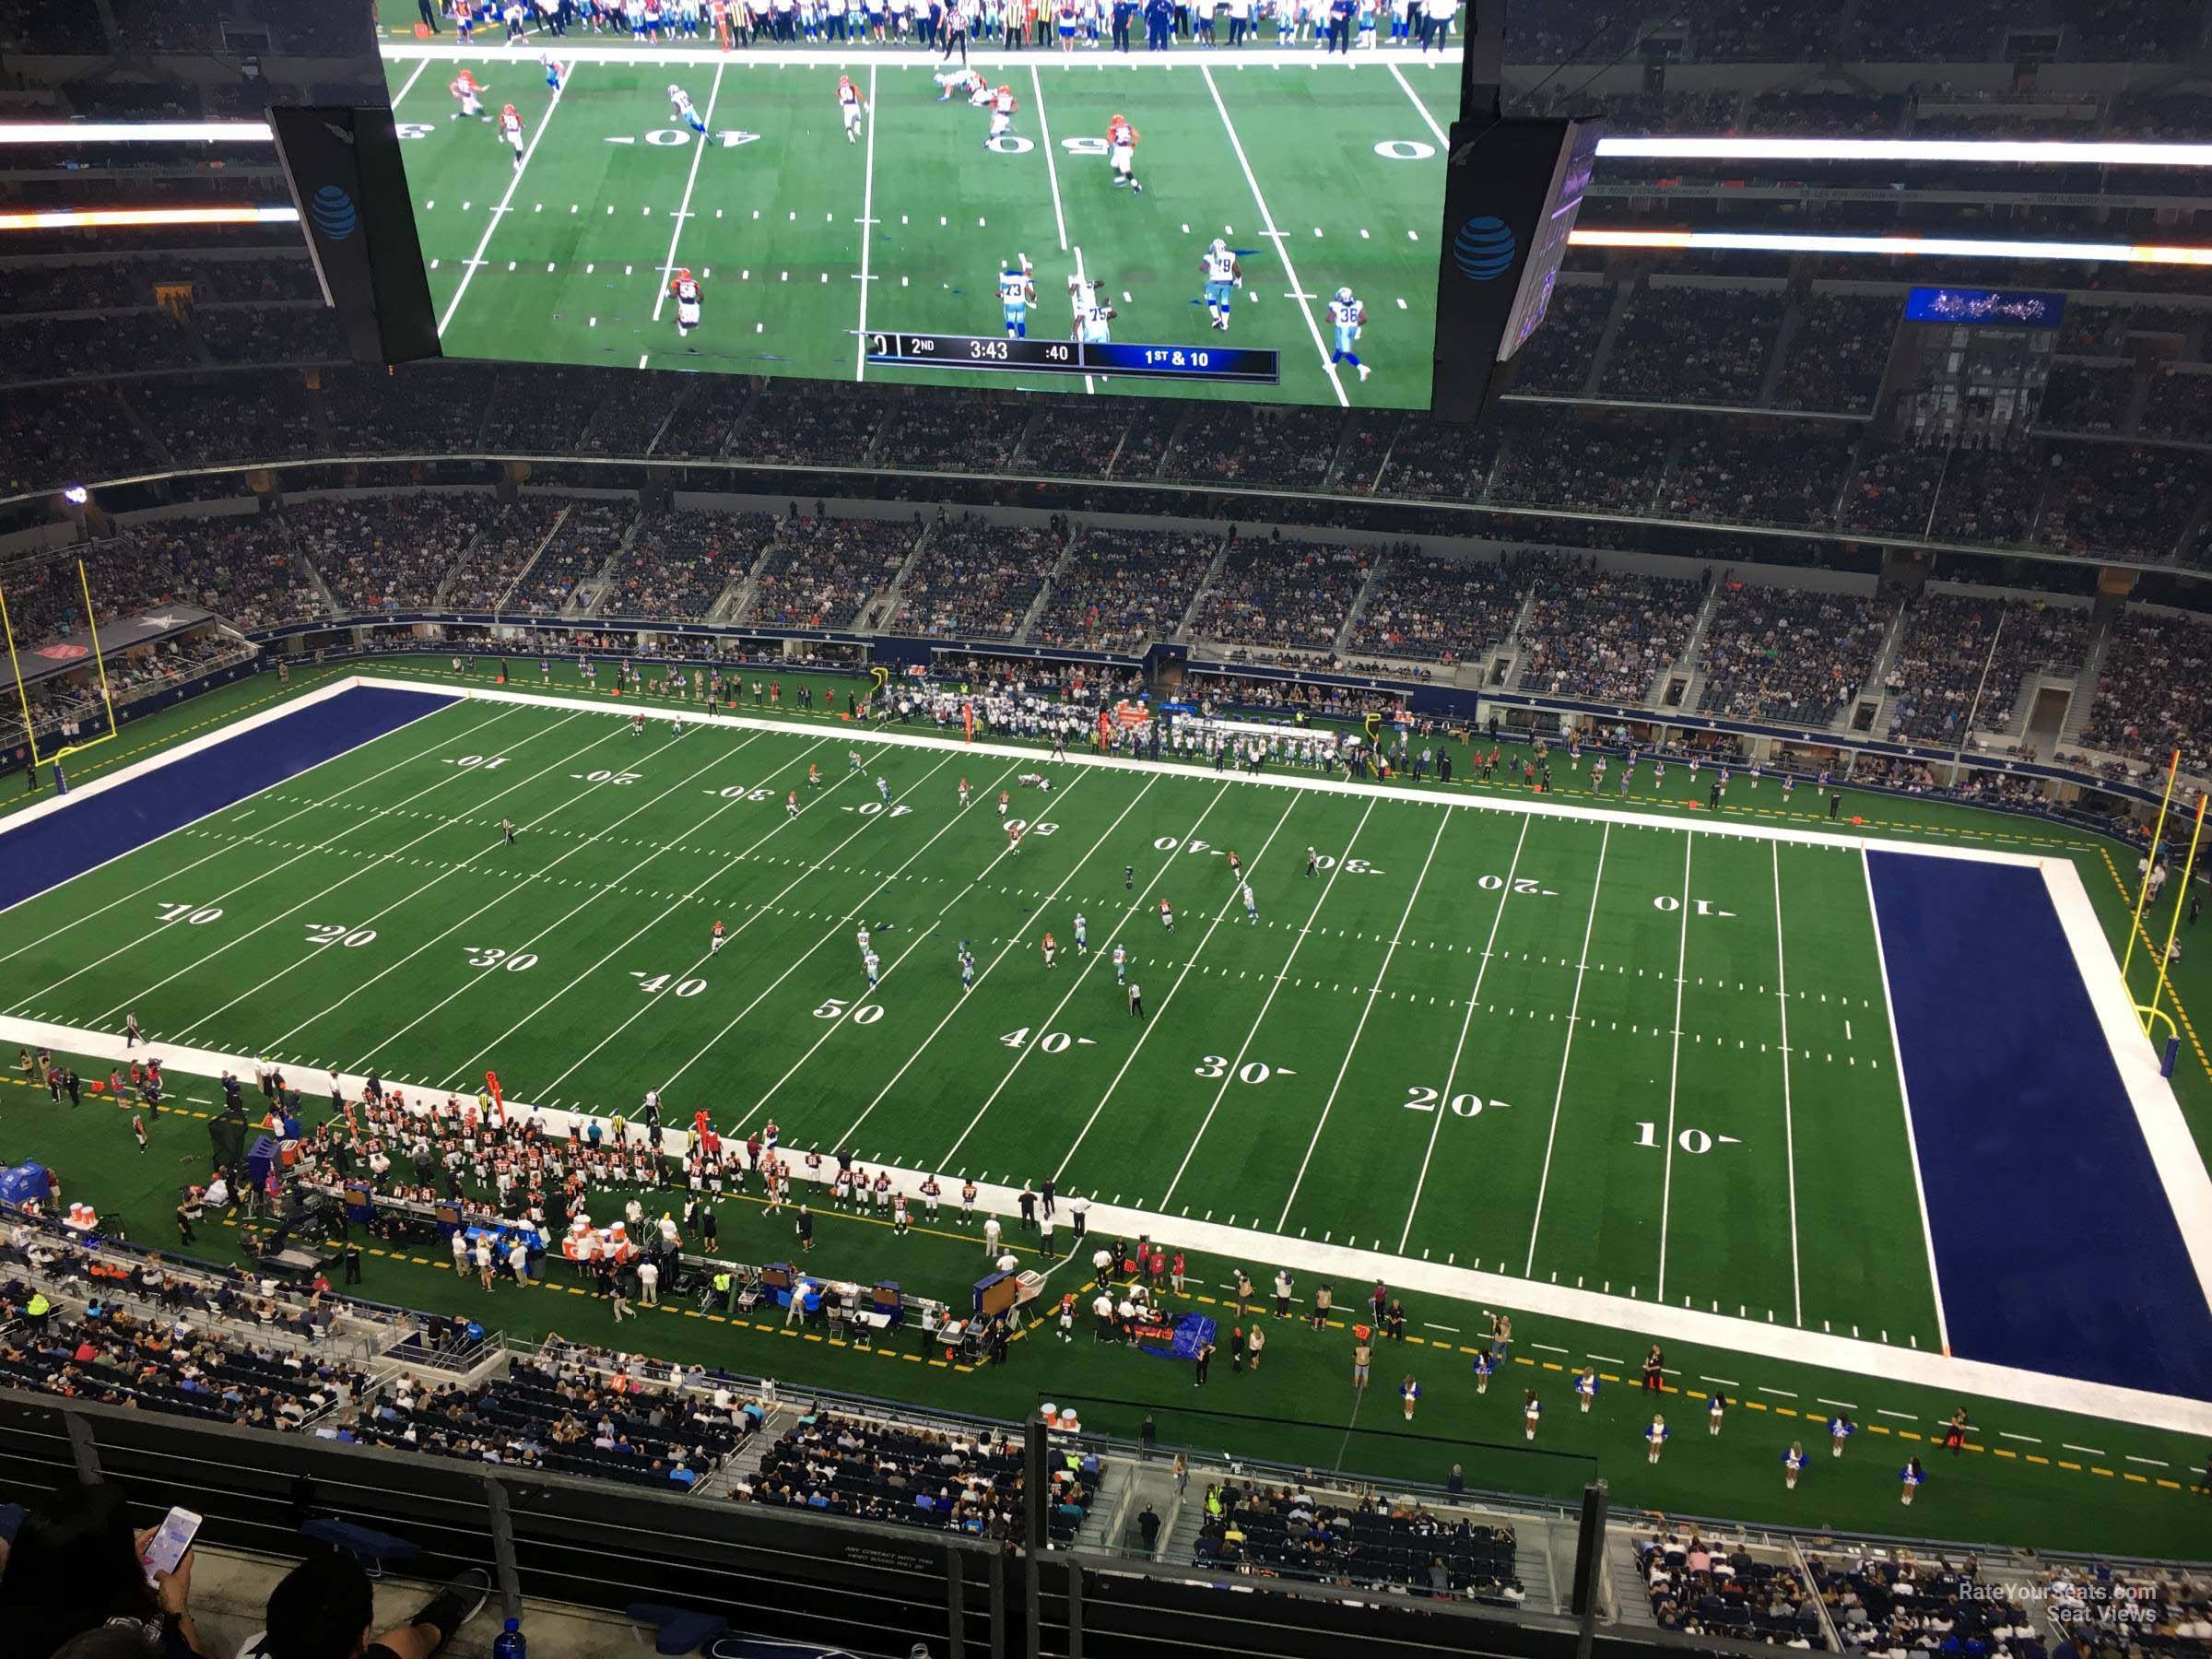 section 441, row 22 seat view  for football - at&t stadium (cowboys stadium)